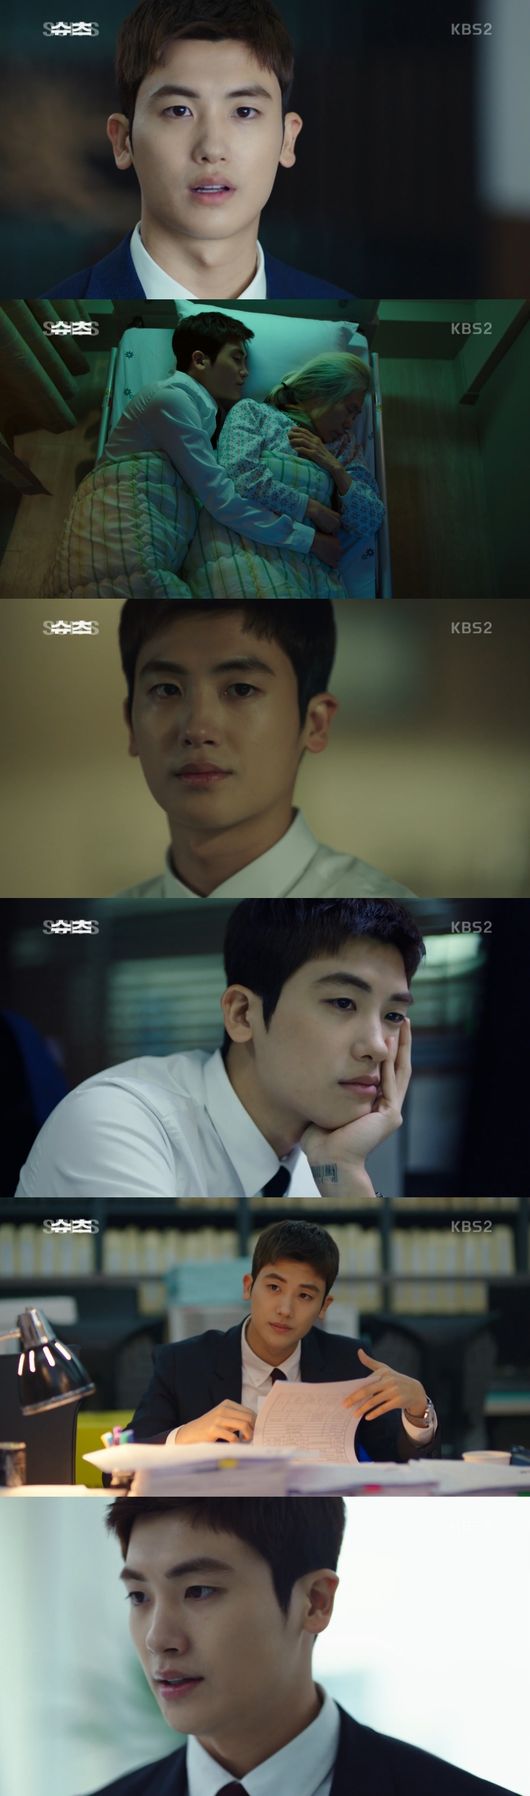 He had a dream since he was a child, and he had the ability to be, but the world never gave him a chance, and he had a chance to be a miracle.Actor Park Hyung-sik plays the role of Ko Yeon-woo, a fake new lawyer, in KBS 2TVs new tree drama Suits (playplayplay by Kim Jung-min/directed Kim Jin-woo/produced monster union, Enter Media Pictures).Ko Yeon-woo is a man with a genius memory that he never forgets when he sees and understands once, and a empathy ability to disarm his opponent.The story of Suits is the story of the opportunity of a fake lawyer in front of the door of a world where he rarely opens.He is a man of two abilities that are difficult to have only one. He has the charm of stealing his eyes.It is also true that even the main character of the drama can have such a perfect and enviable character.However, Ko Yeon-woo brings a consensus to viewers that they want to cheer rather than the gap of different from me. In the second episode of Suits, which was broadcast on the 26th, the special aspect of such a character, Park Hyung-sik, was more intensely touched.On this day, Ko Yeon-woo made his first commute as a fake new lawyer.As soon as he first came to work, he received a dismissal notice, but he survived the best law firm in Korea again due to the desperation of standing at the edge of the cliff. After that, Ko Yeon-woo was not a real lawyer, but he solved the situations given in his own way.He listened to his clients story and succeeded in wiggling and using the situation cleverly.The appearance of Ko Yeon-woo, who had nothing in his condition for the title of lawyer, was awkward but faced with the problem and solved it, giving viewers a thrilling pleasure and surrogate satisfaction. Park Hyung-sik is melting in Suits, containing both parts of the character, such as brightness, darkness, sharpness and softness.When his brain flashes, the exclamation of genius comes out.On the other hand, even though he is a friend who put himself in a crisis, he can not be tough, or he visits a grandmother who is hospitalized and makes a person who sees him when he sleeps together in a narrow bed.